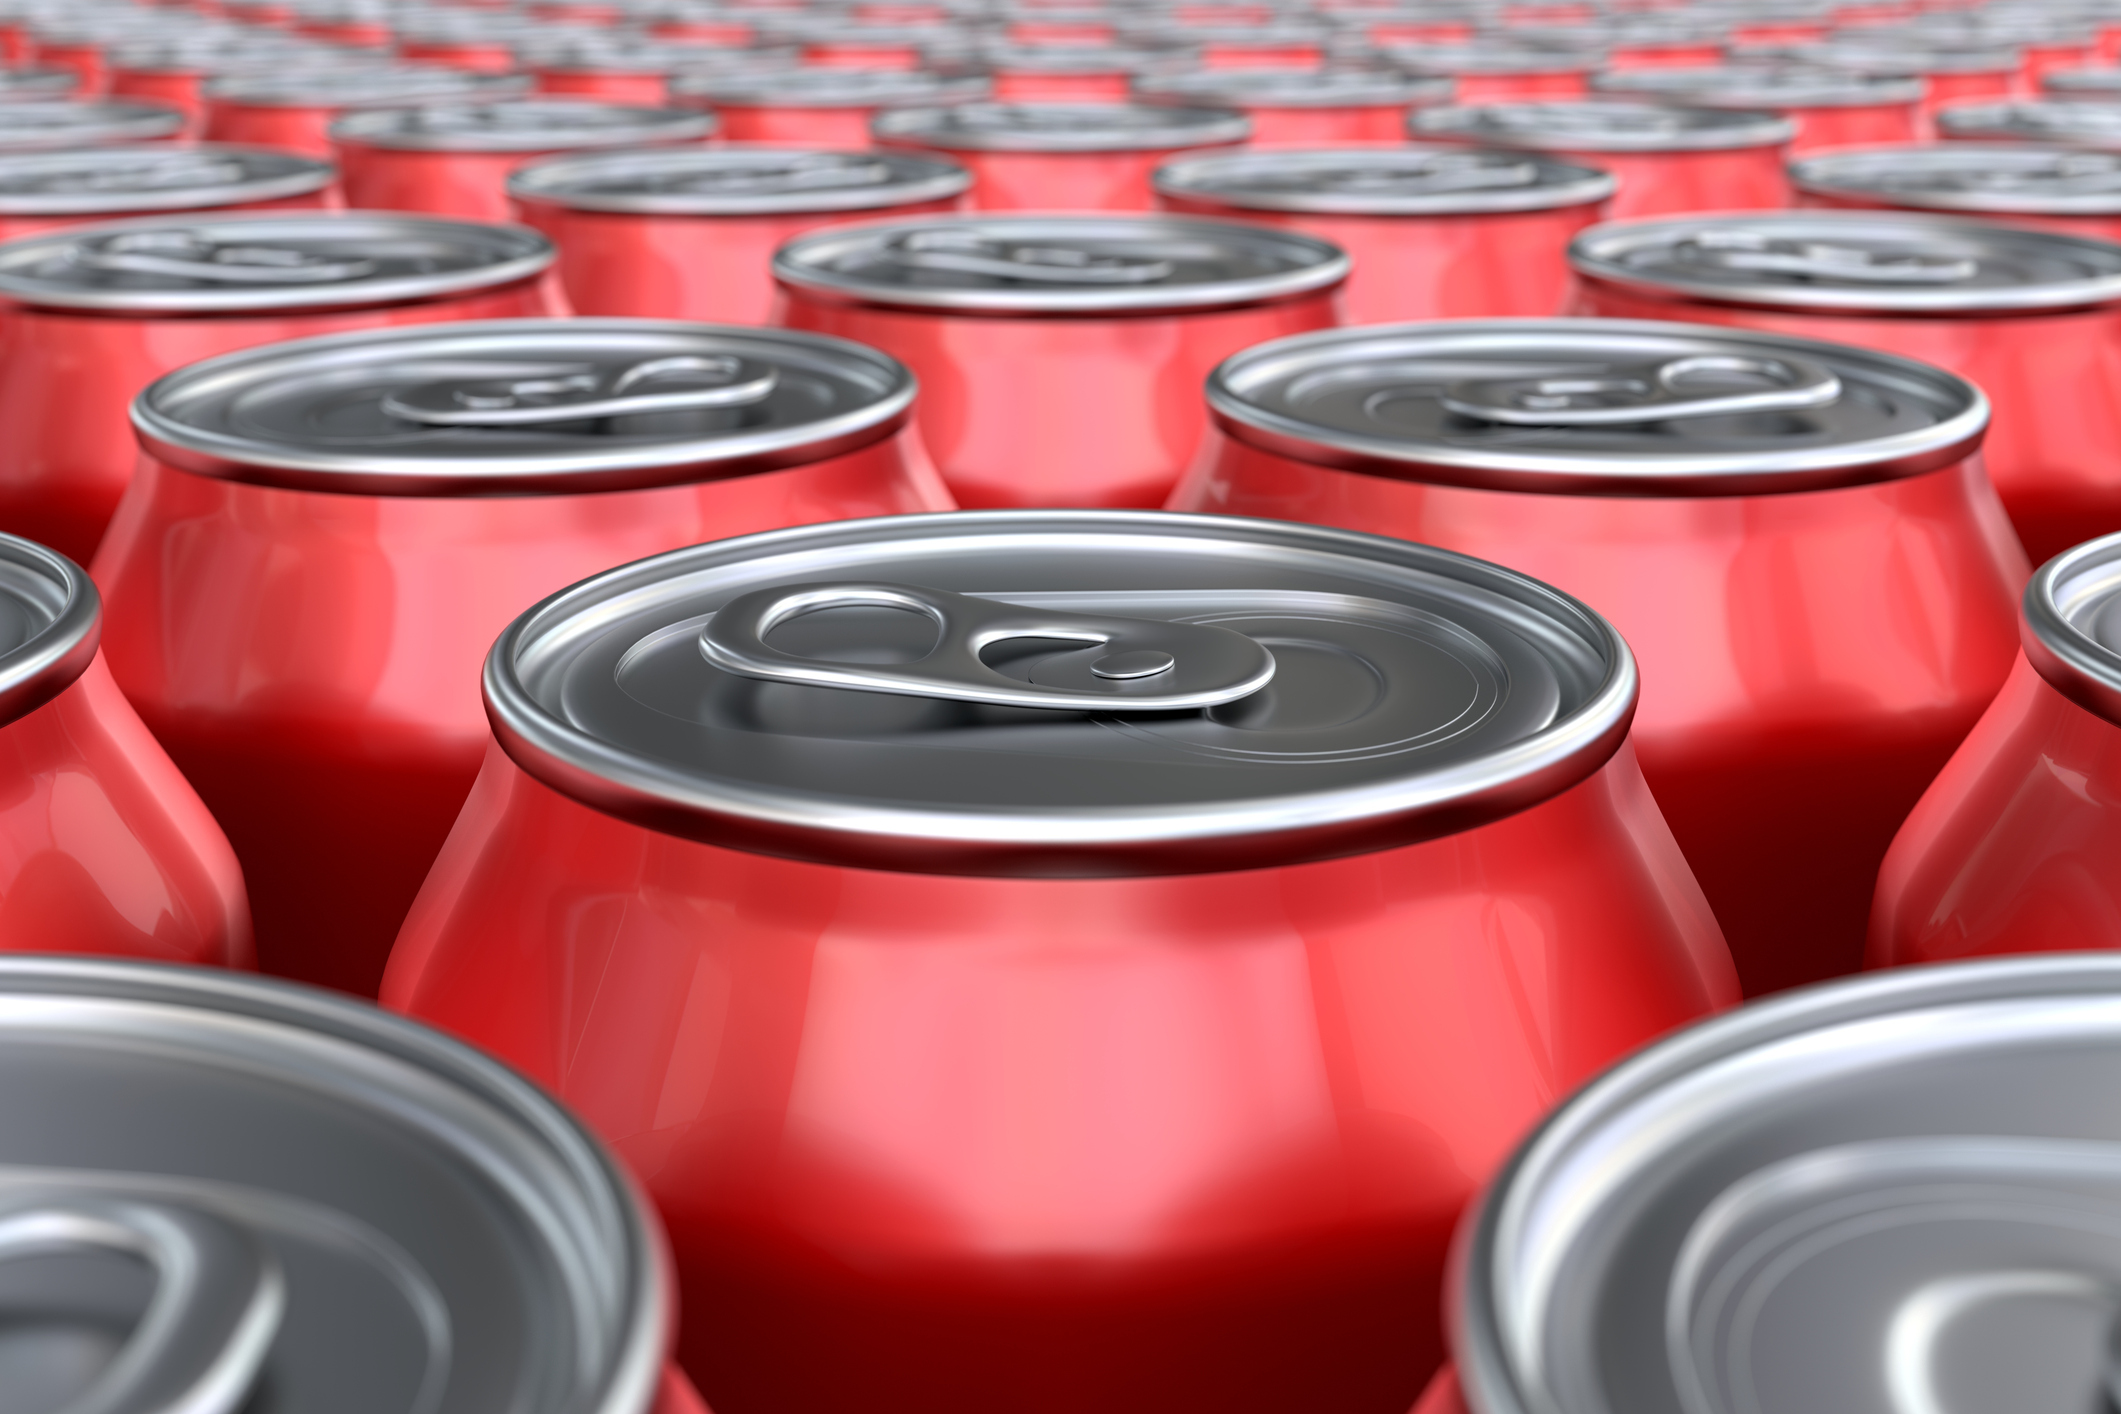 canned beverages 